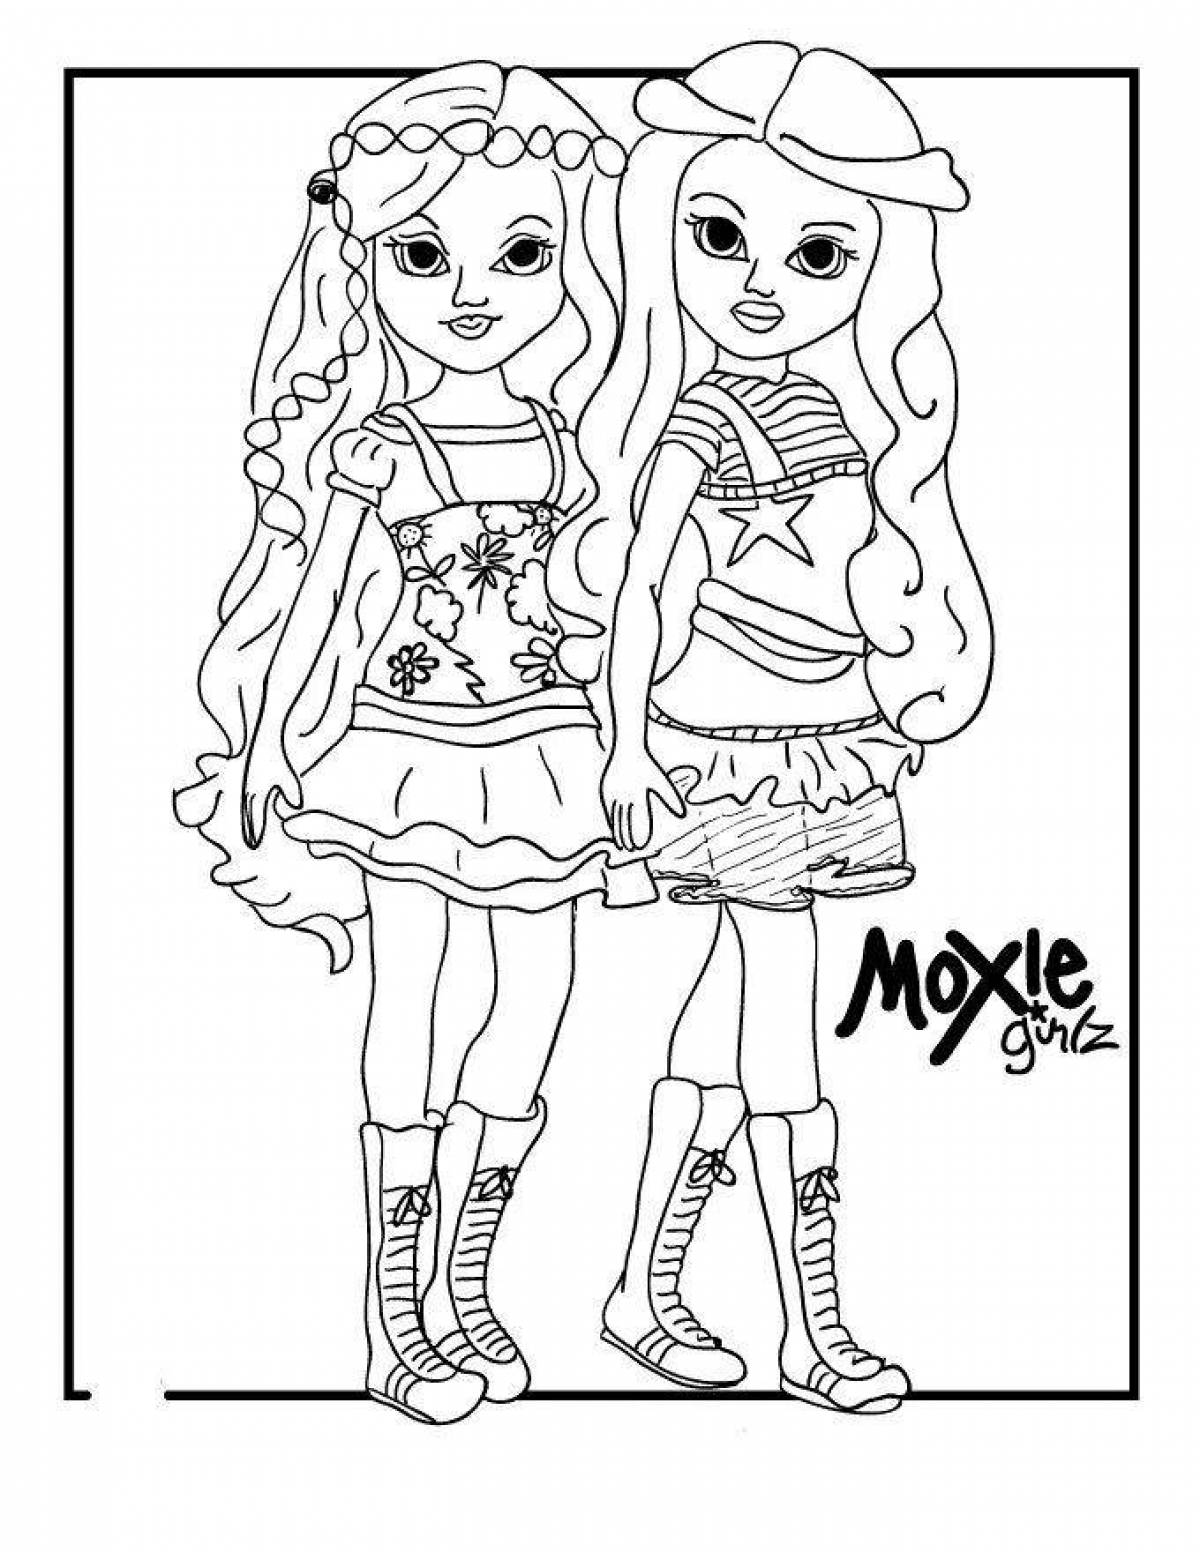 Boxy boo playful coloring page